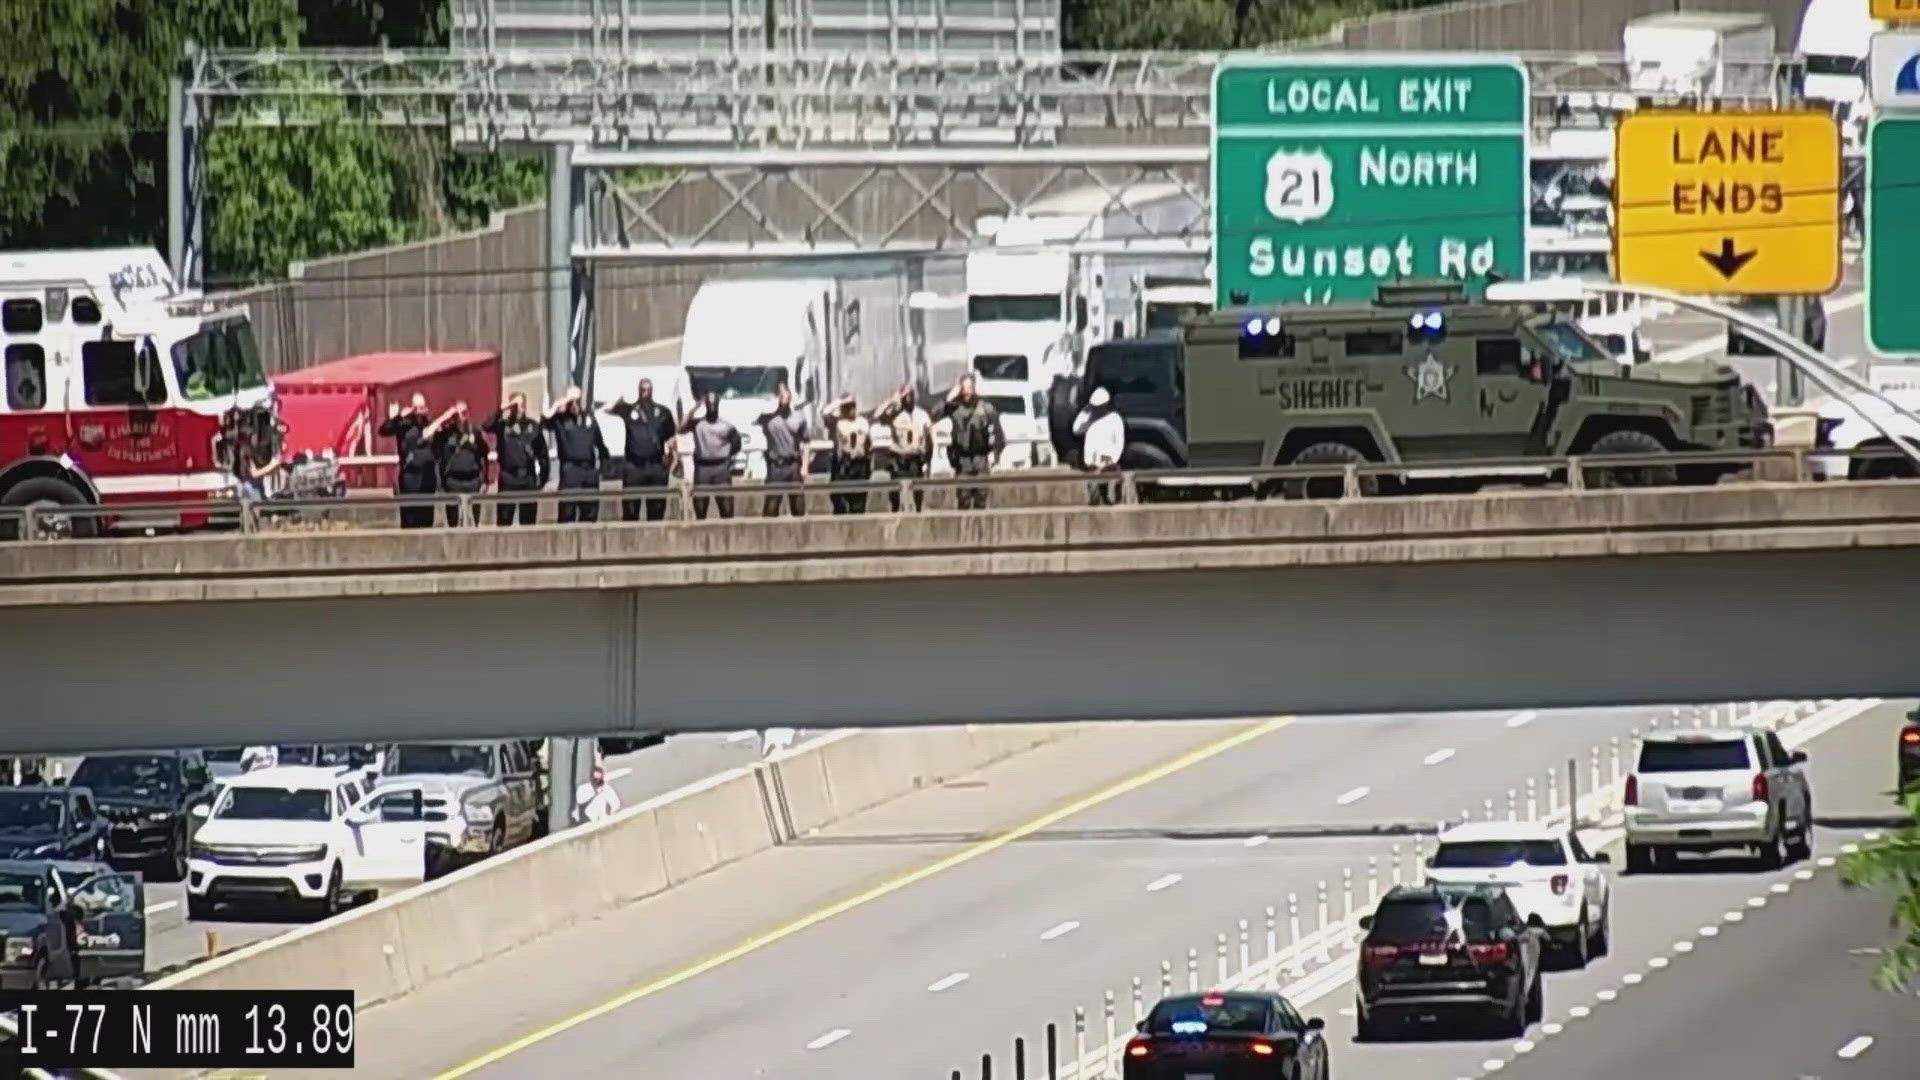 Video shows a long procession Wednesday as law enforcement transported Deputy Marshal Thomas Weeks.